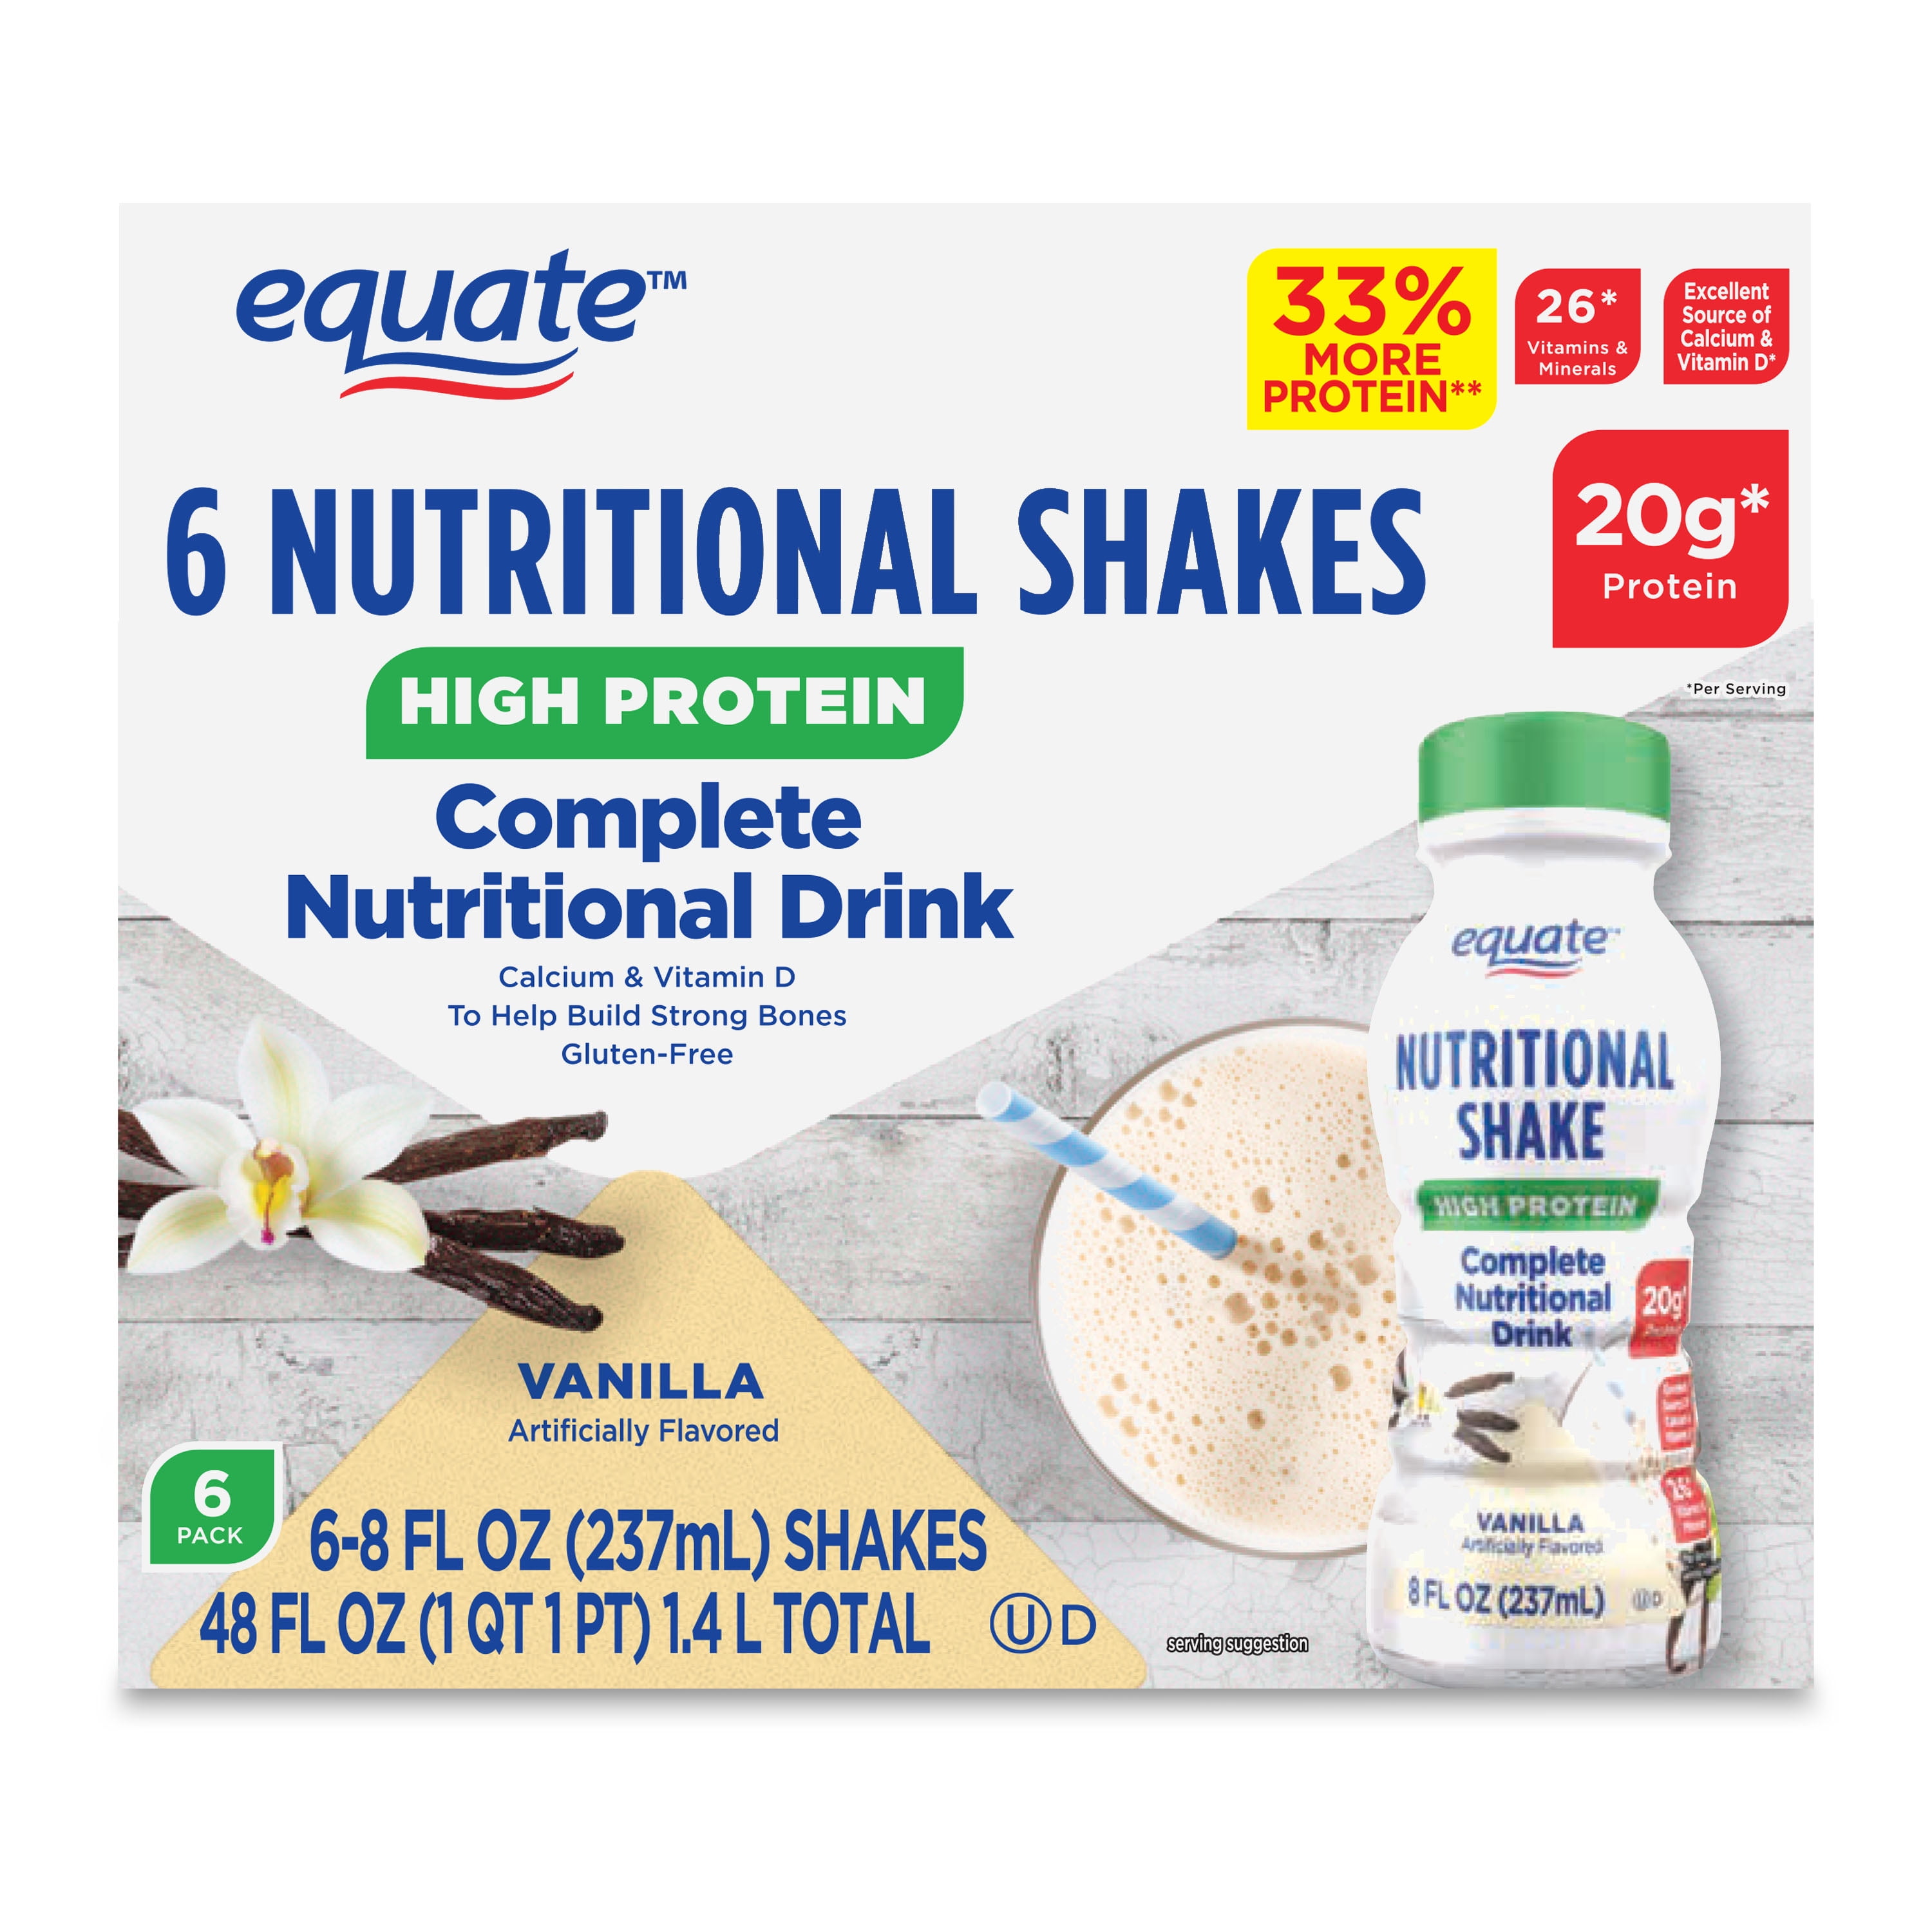 Equate High Protein Nutritional Shakes, Vanilla, 8 oz, 6 count